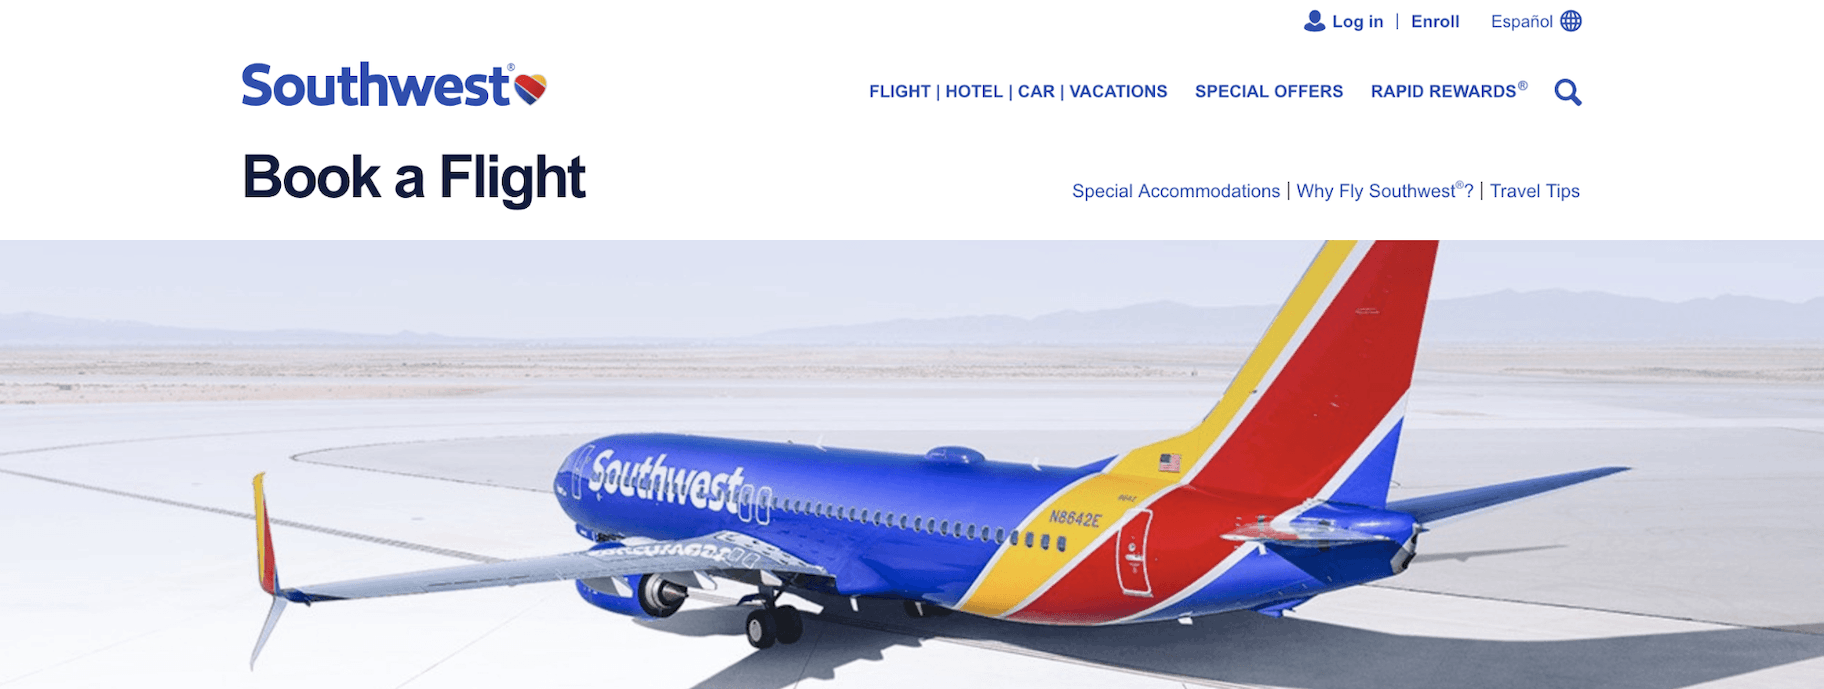 Southwest Airlines Vision Statement